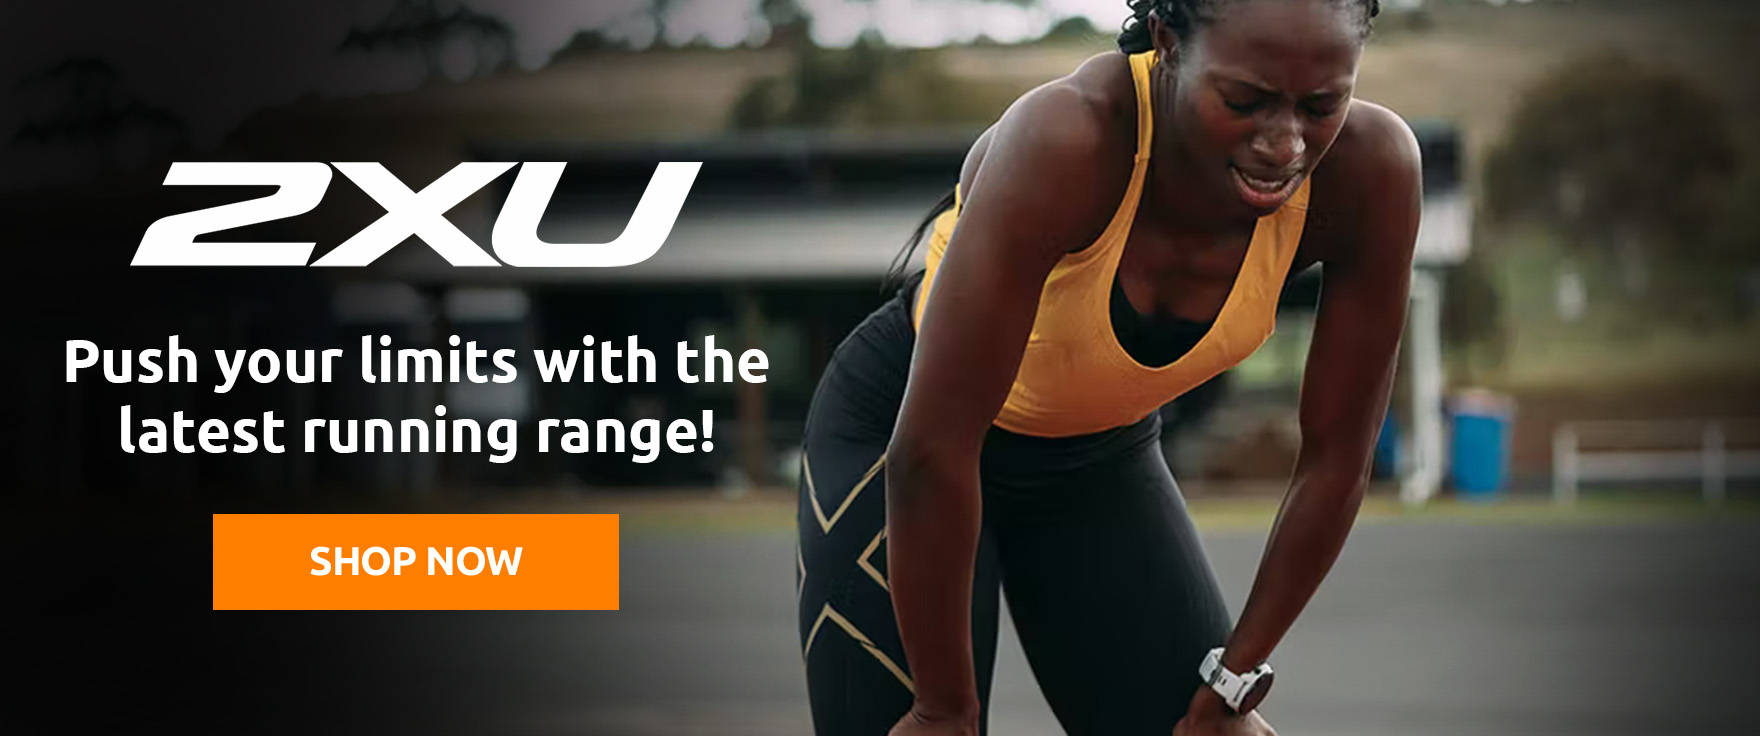 Push your limits with the latest 2XU running range!